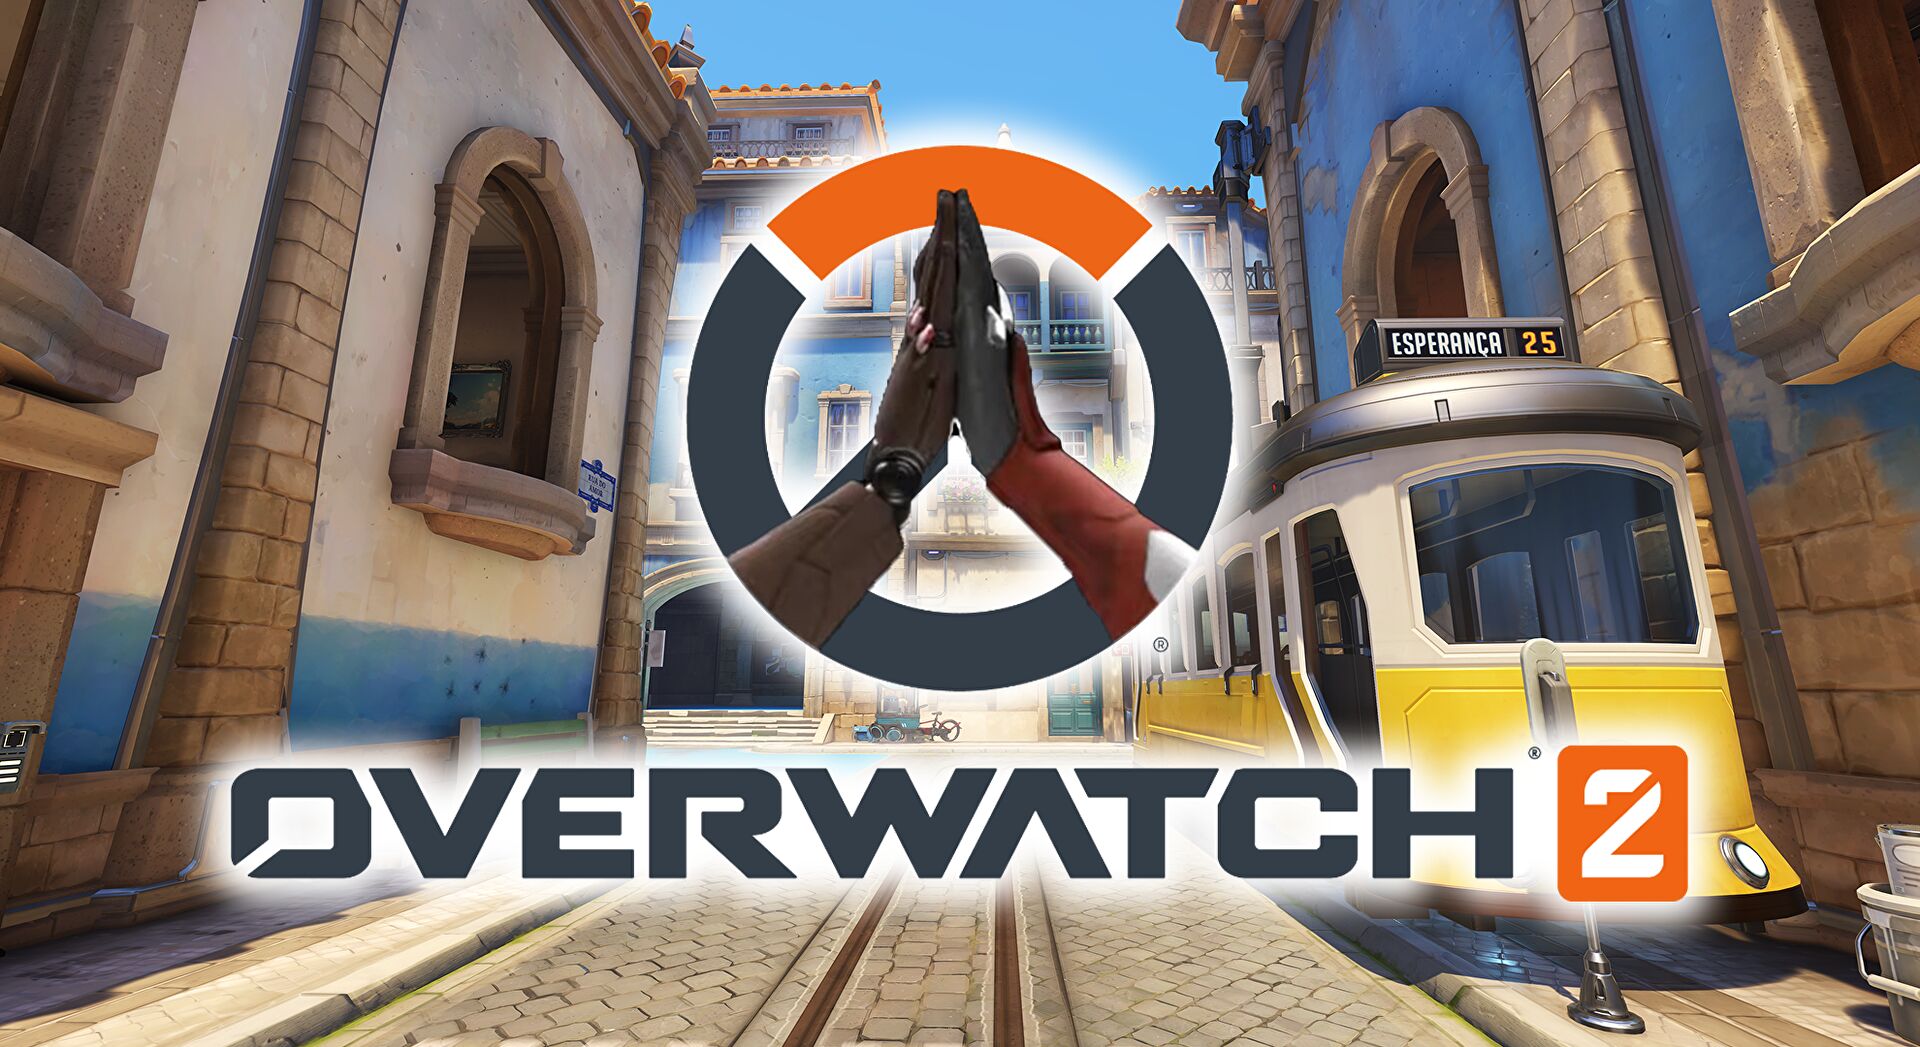 Overwatch 2 puts hope at the center of the new trailer